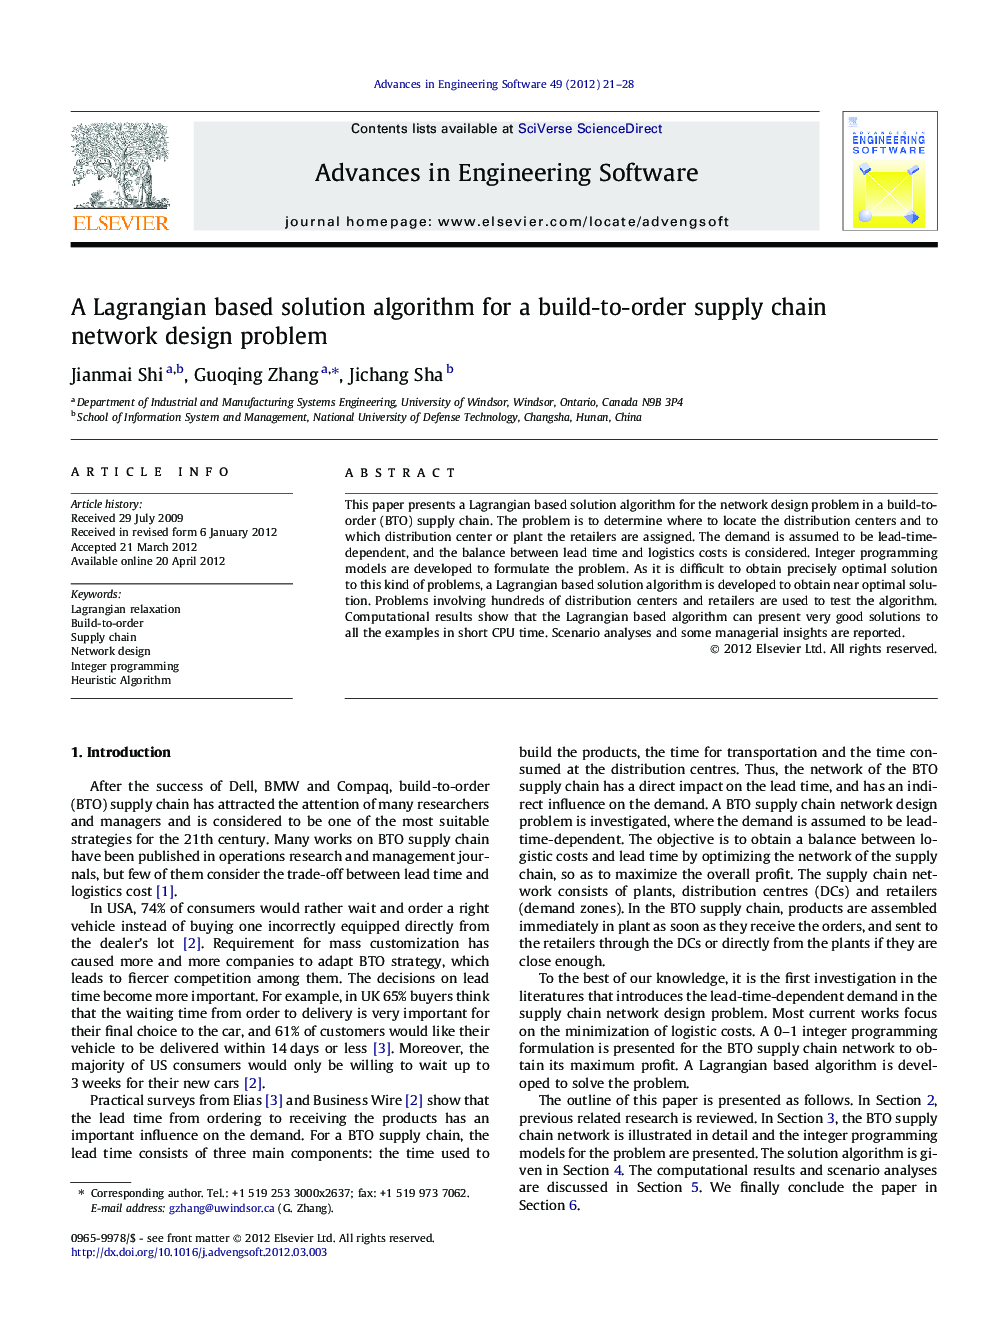 A Lagrangian based solution algorithm for a build-to-order supply chain network design problem